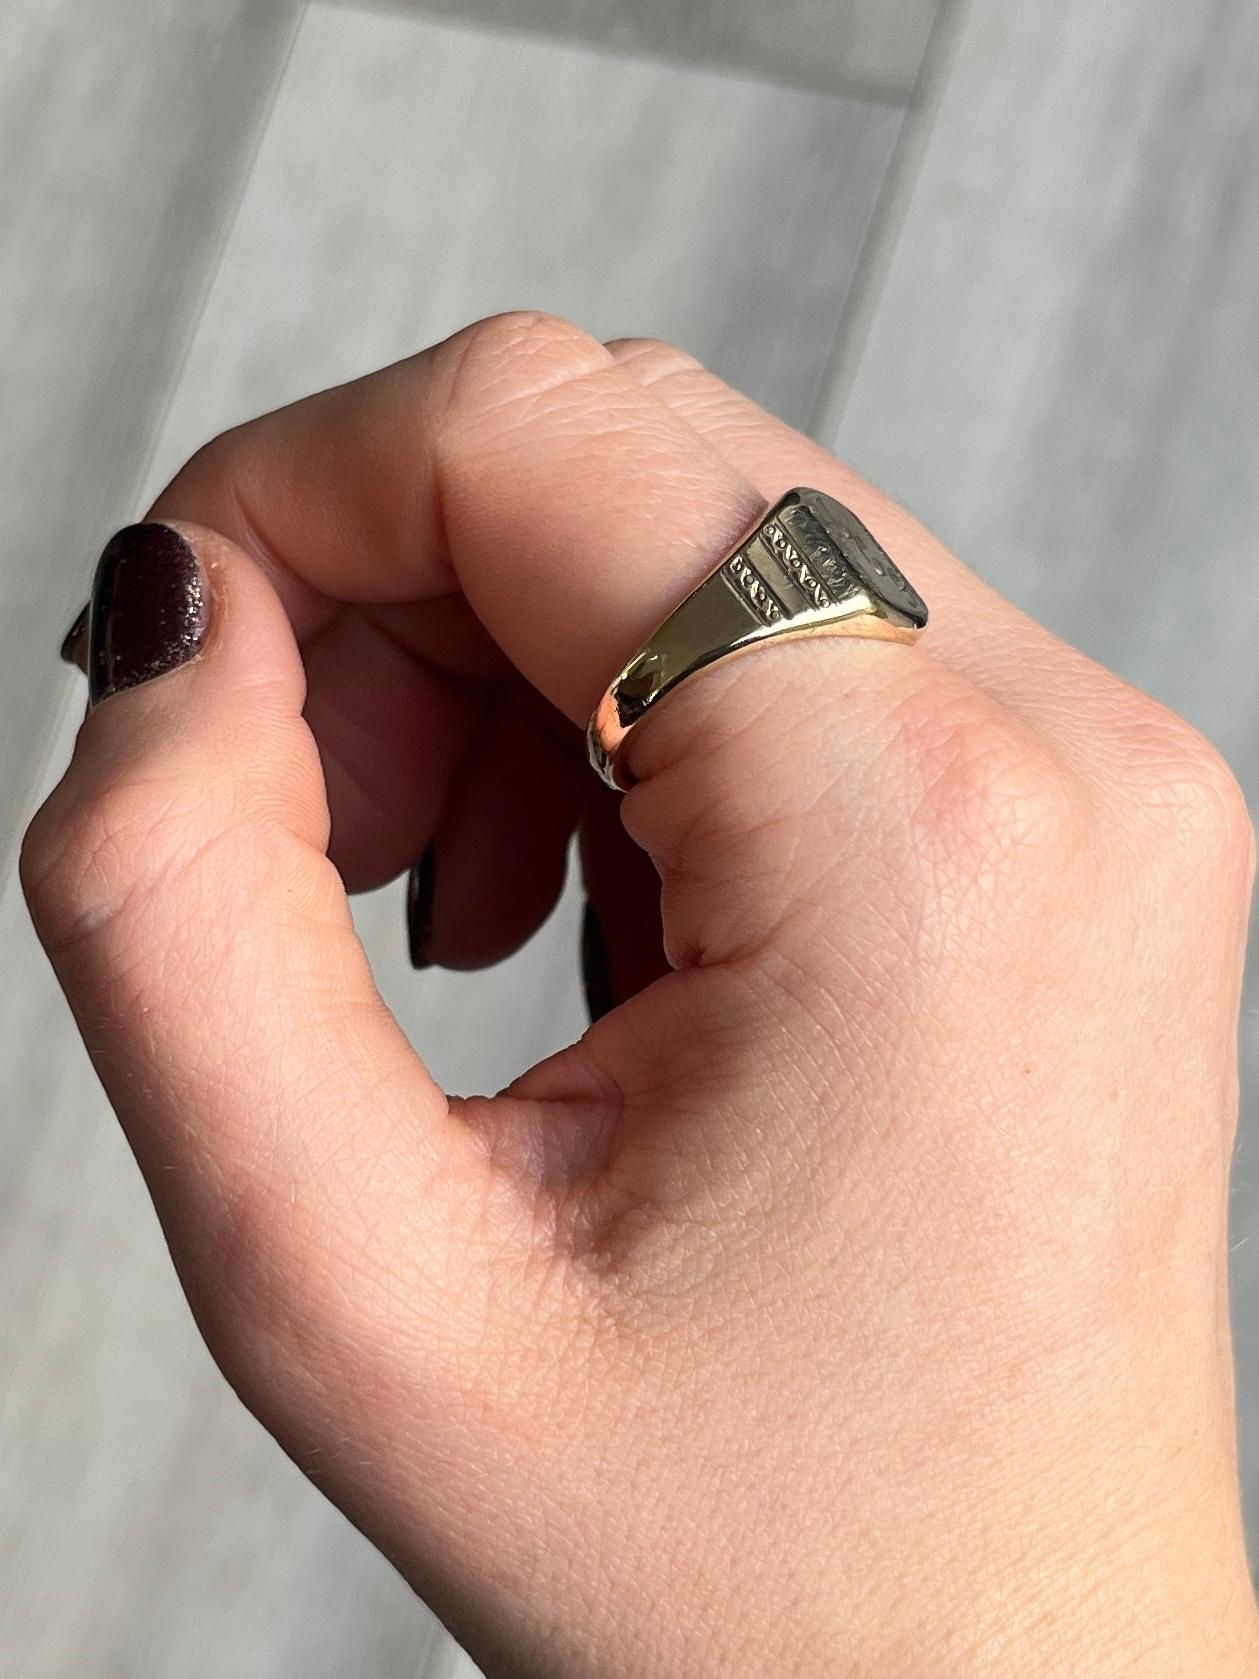 This signet ring is modelled in 9 carat gold and has a chunky feel to it. It has ACG engraved into the face. 

Ring Size: T or 9 1/2 
Face Dimensions: 12x10mm

Weight: 7.5g
